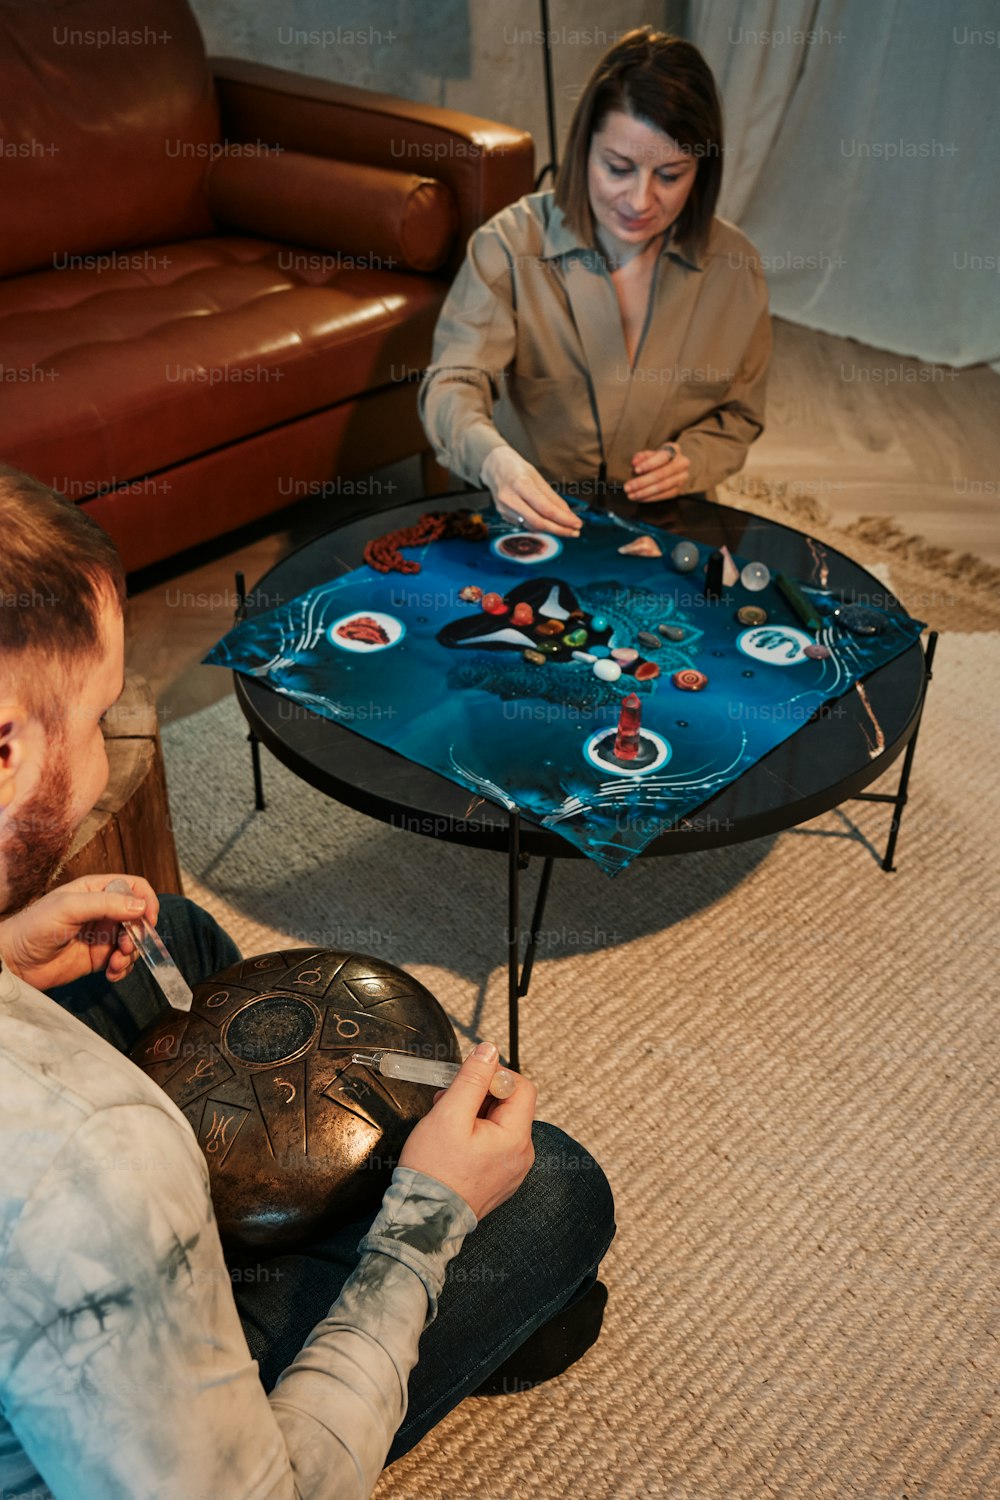 a man and a woman playing a game on a coffee table